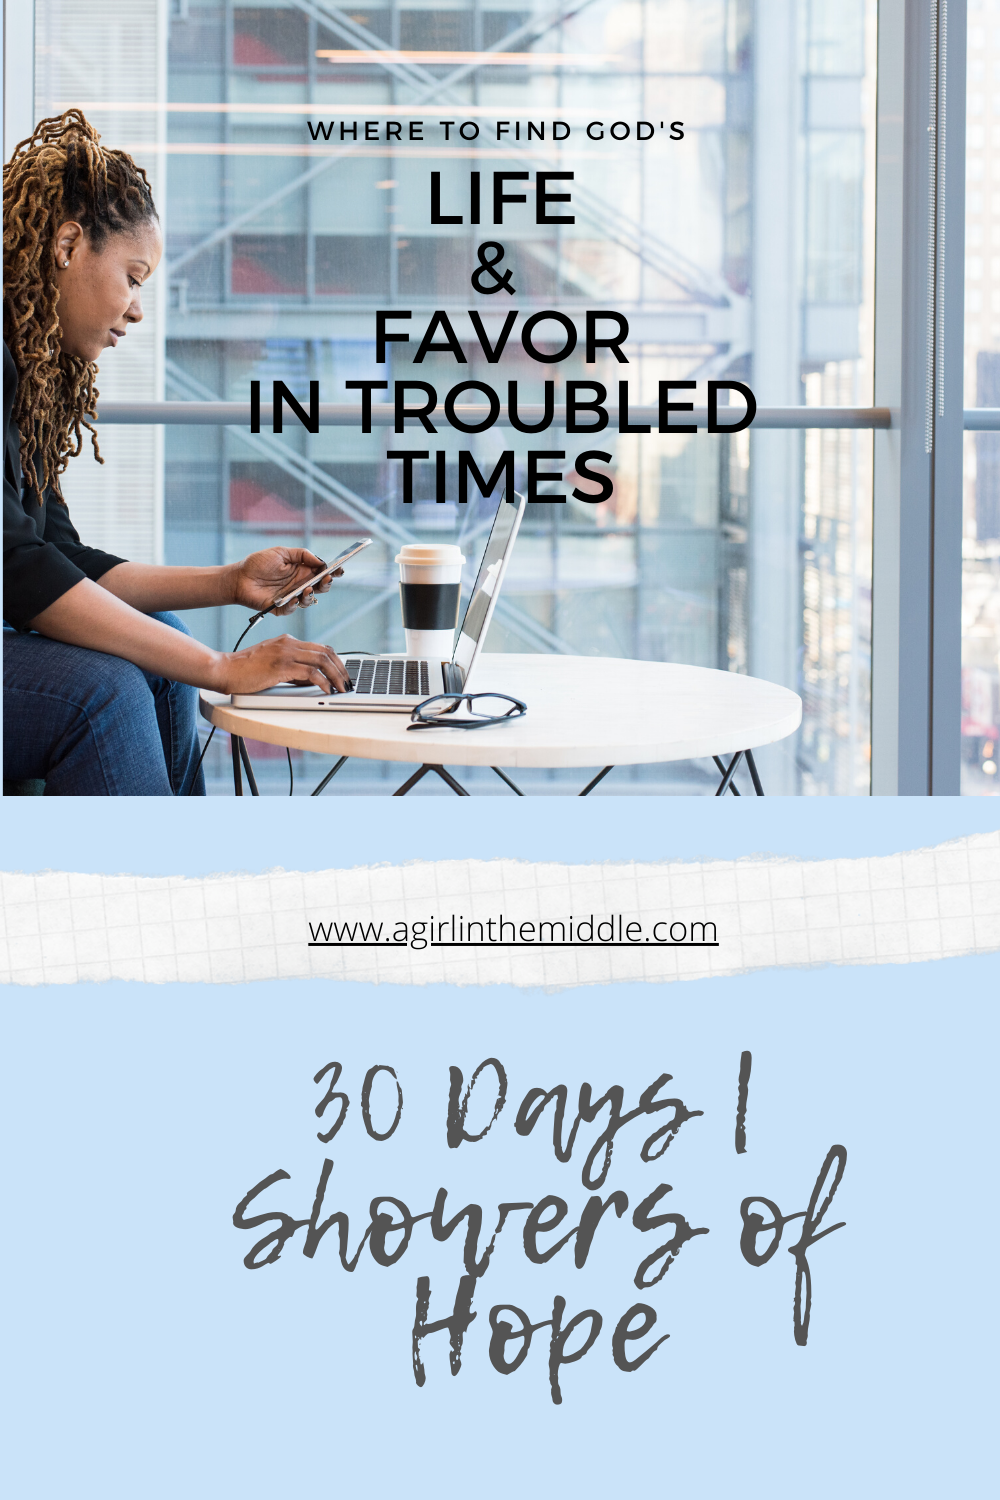 Finding Life & Favor in troubled times